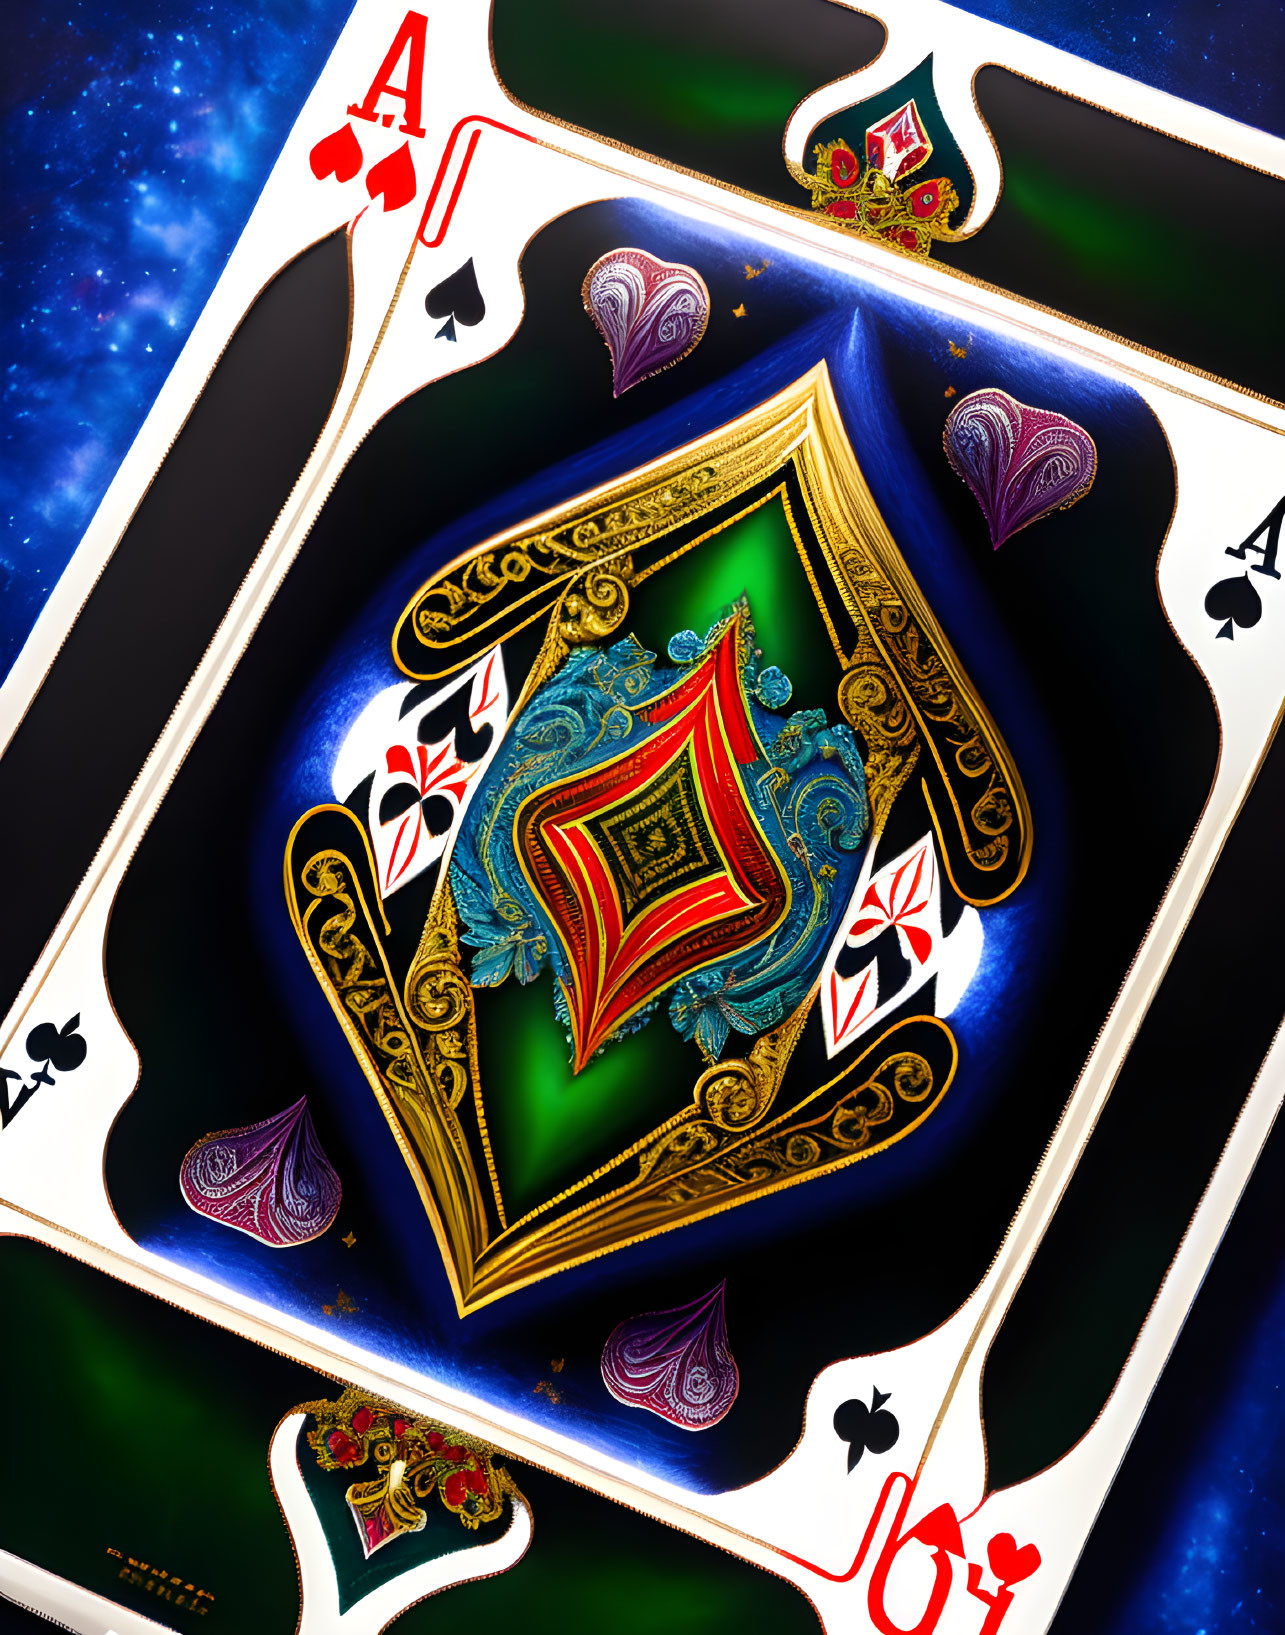 Colorful Ace of Spades Card with Ornate Designs on Space Background